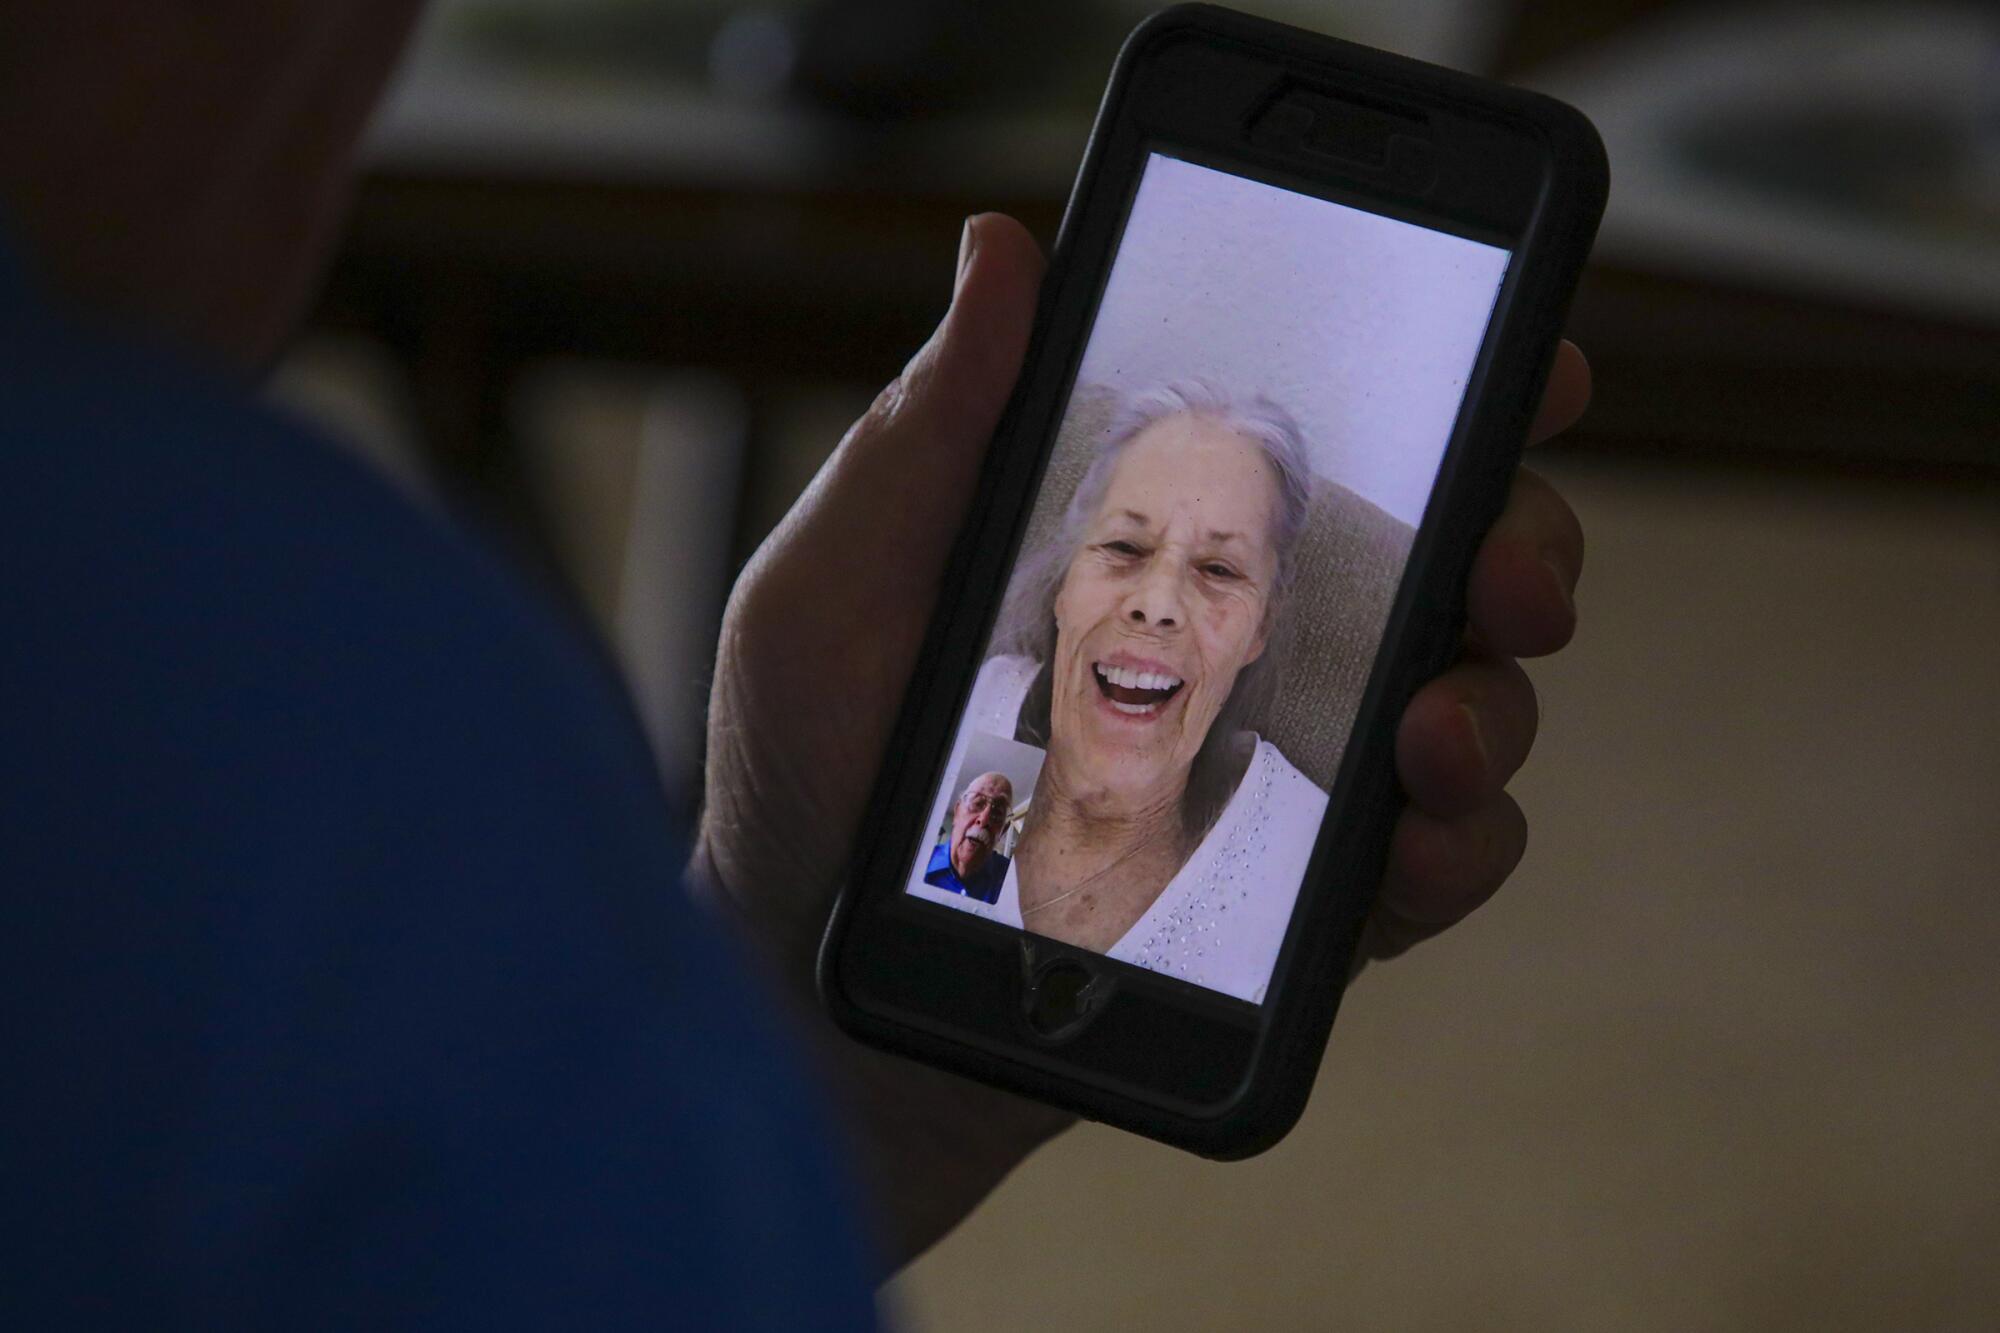 An elderly woman on the screen of a phone held by her husband during a video call